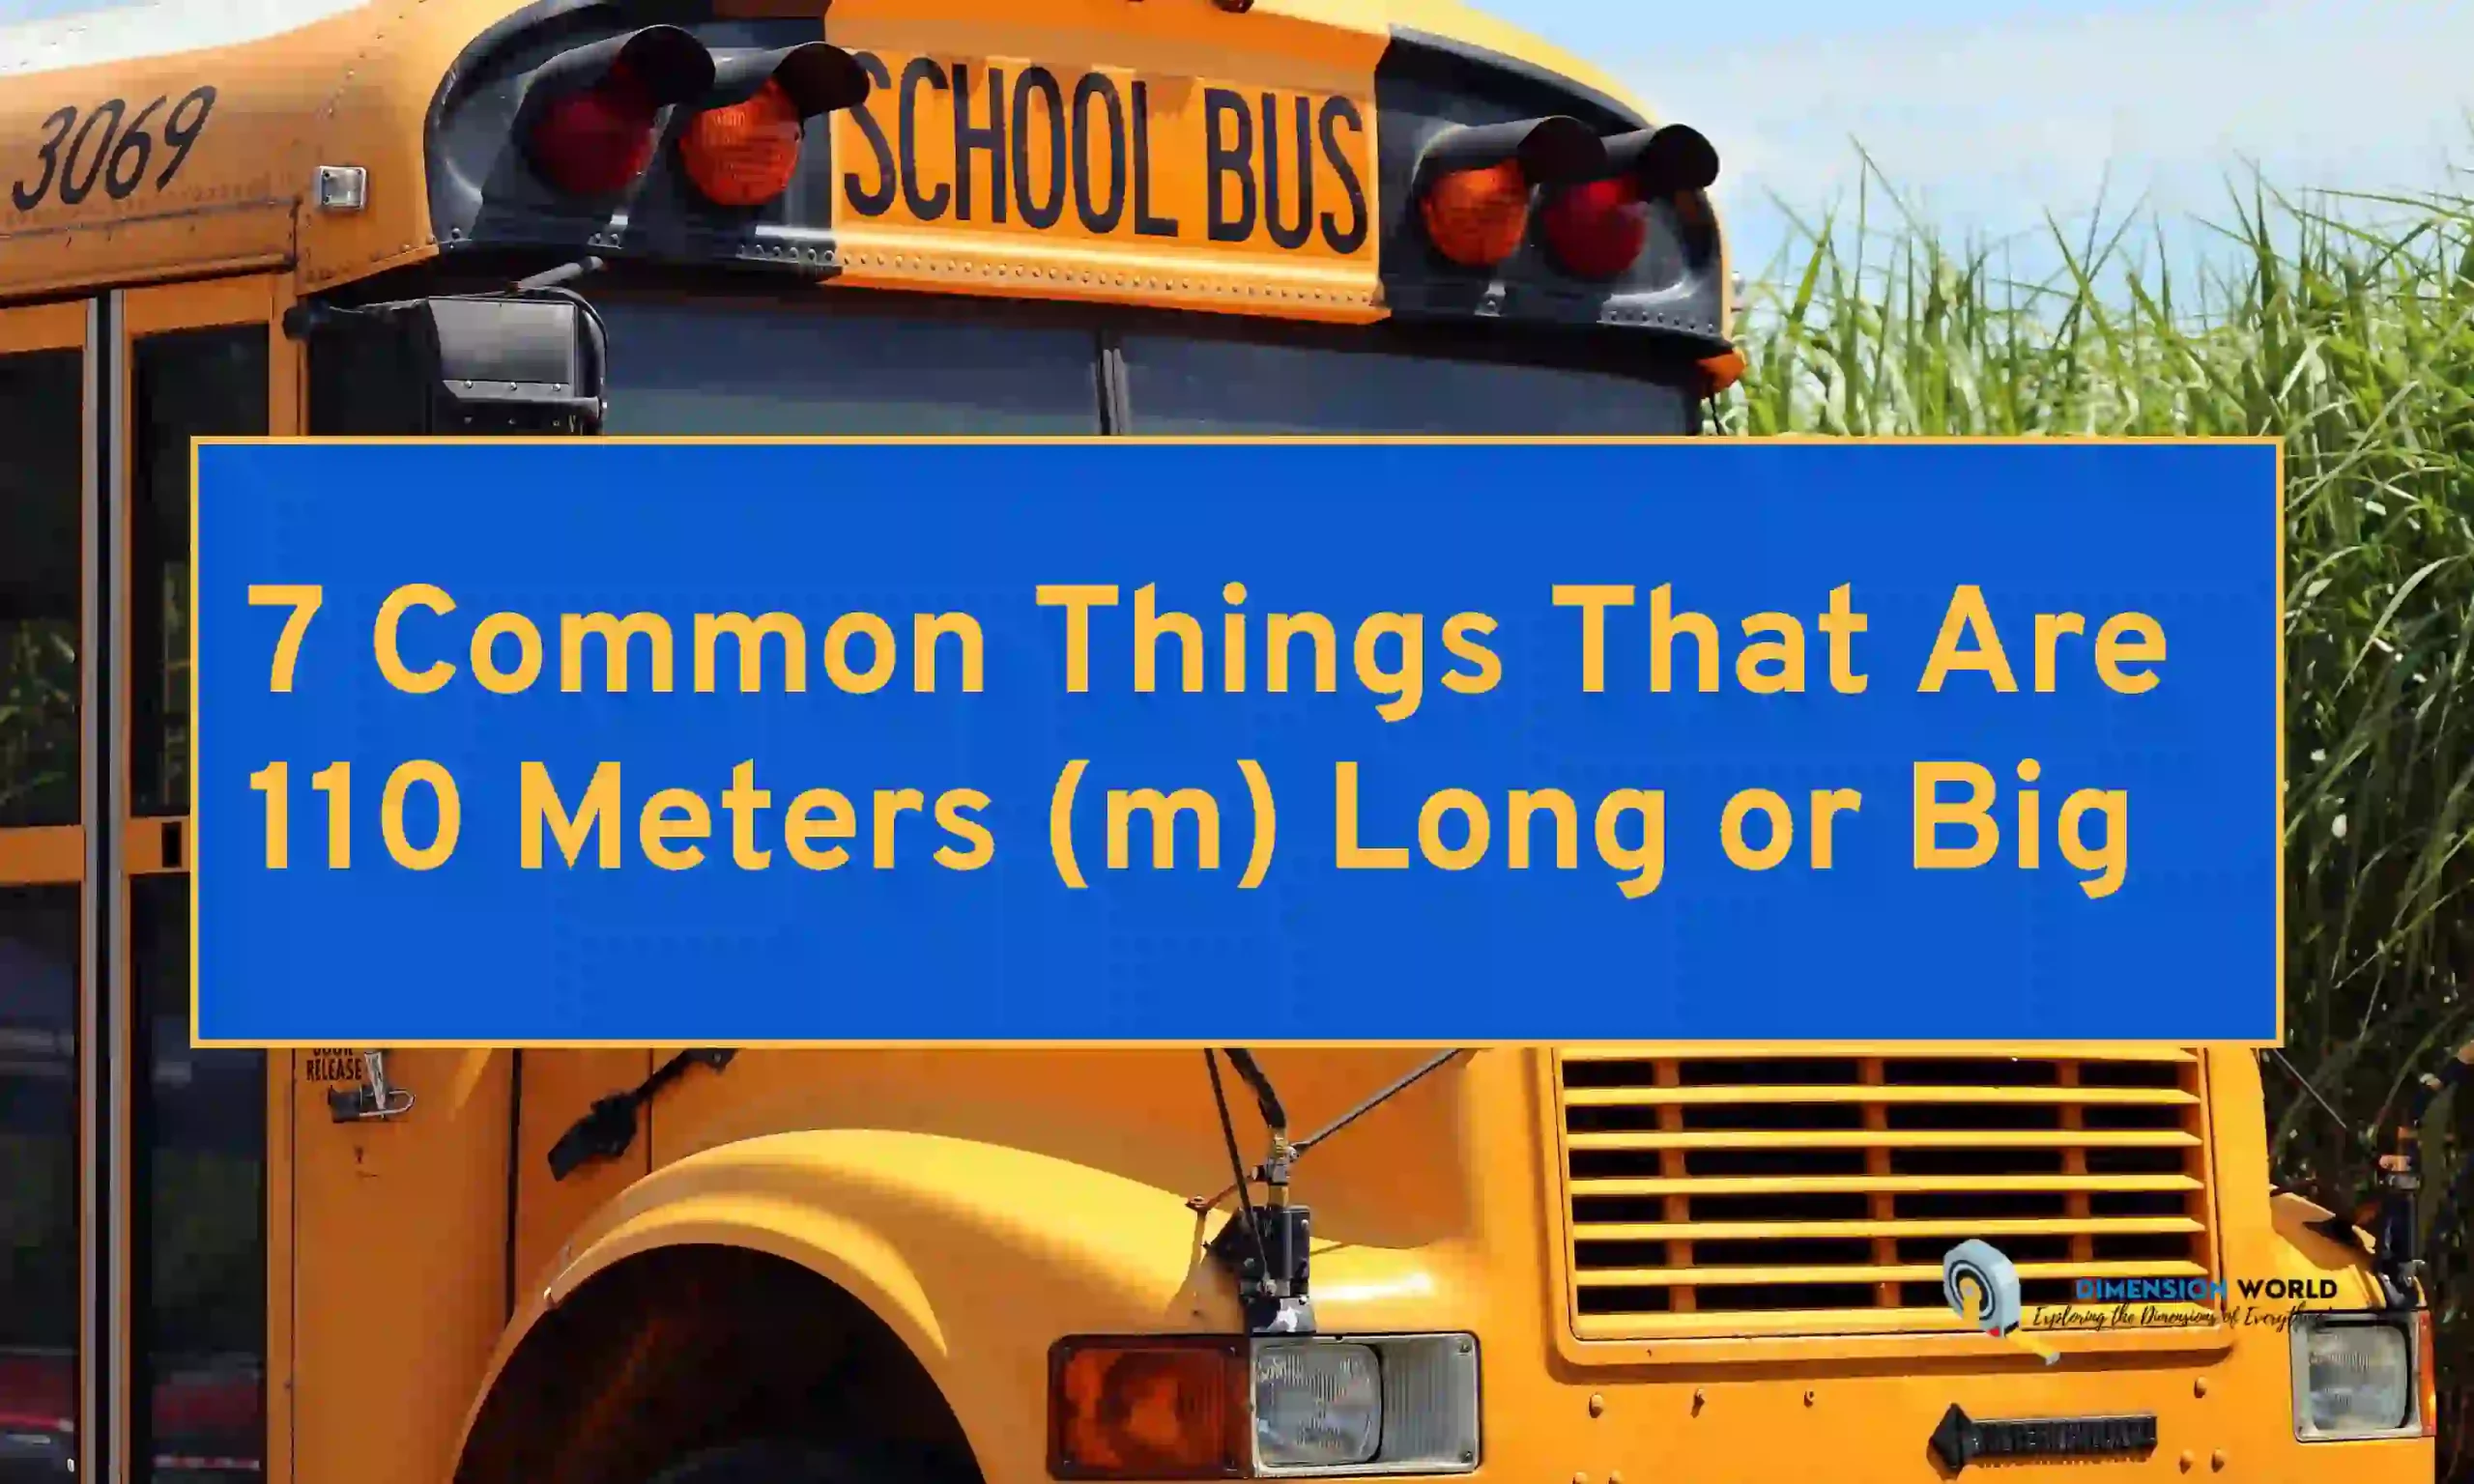 7 Common Things That Are 110 Meters (m) Long or Big